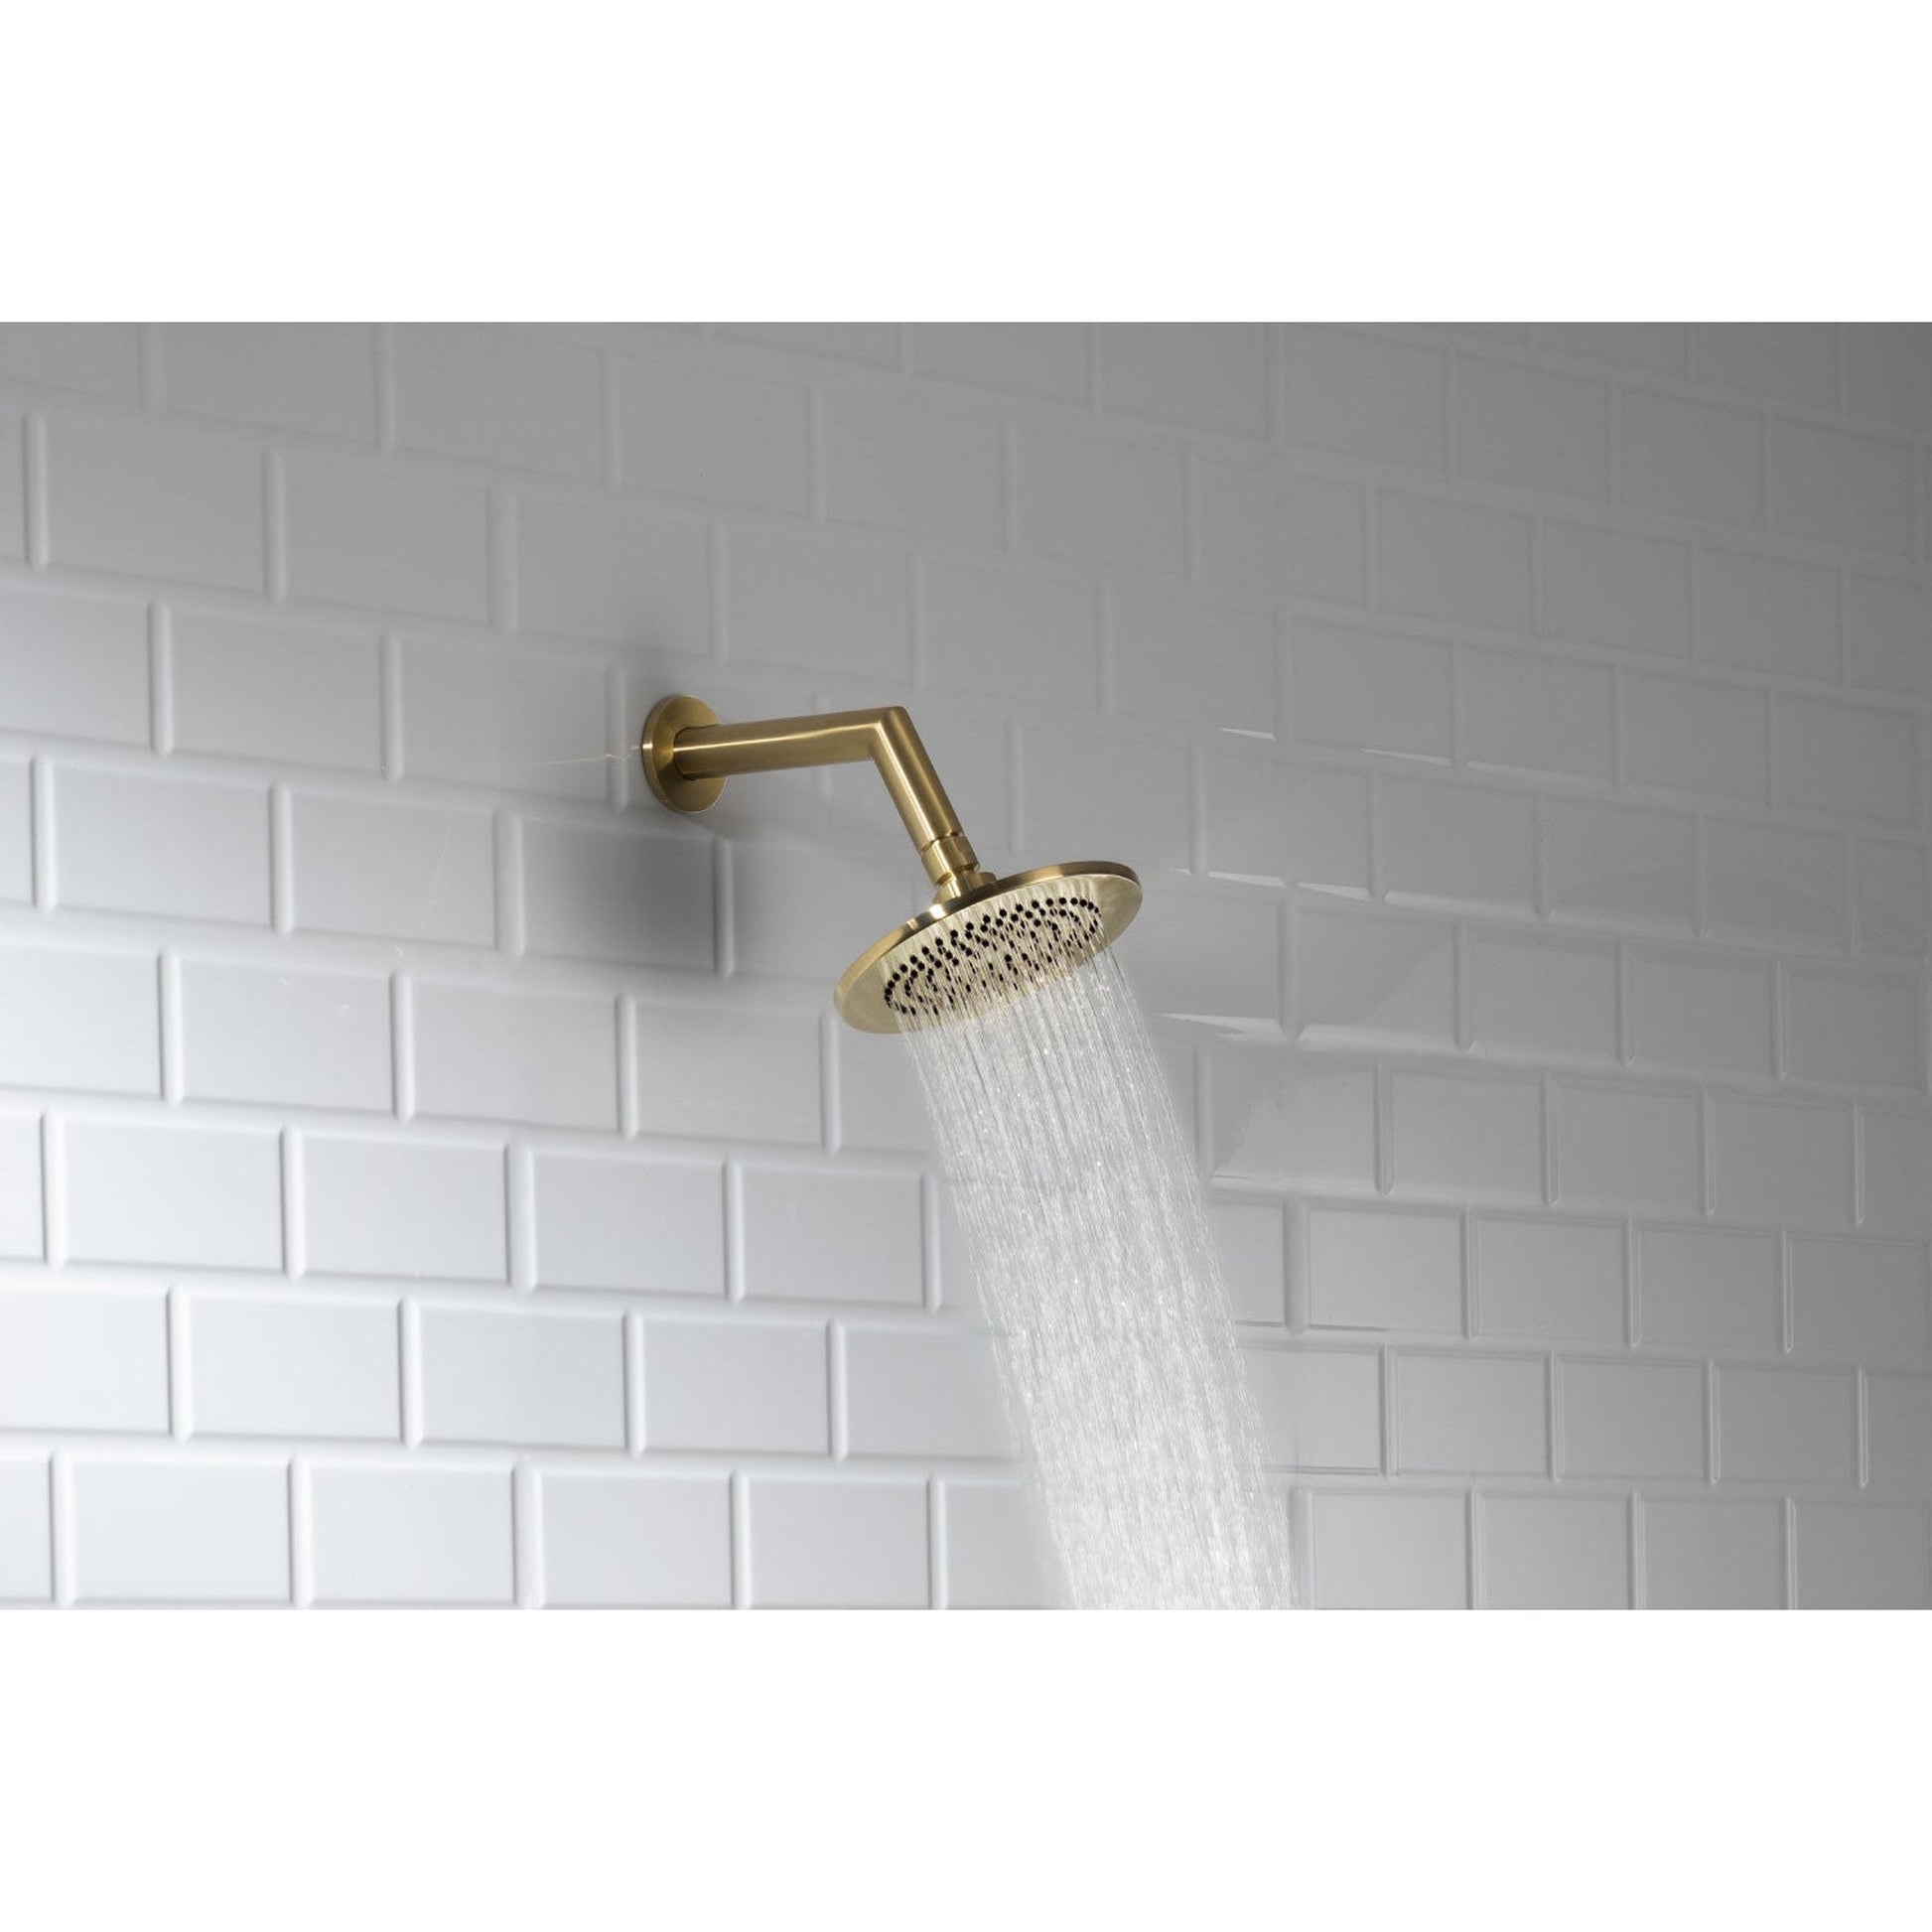 Isenberg Universal Fixtures 6" Matte Black Solid Brass Wall-Mounted Standard Shower Arm With Square Sliding Flange